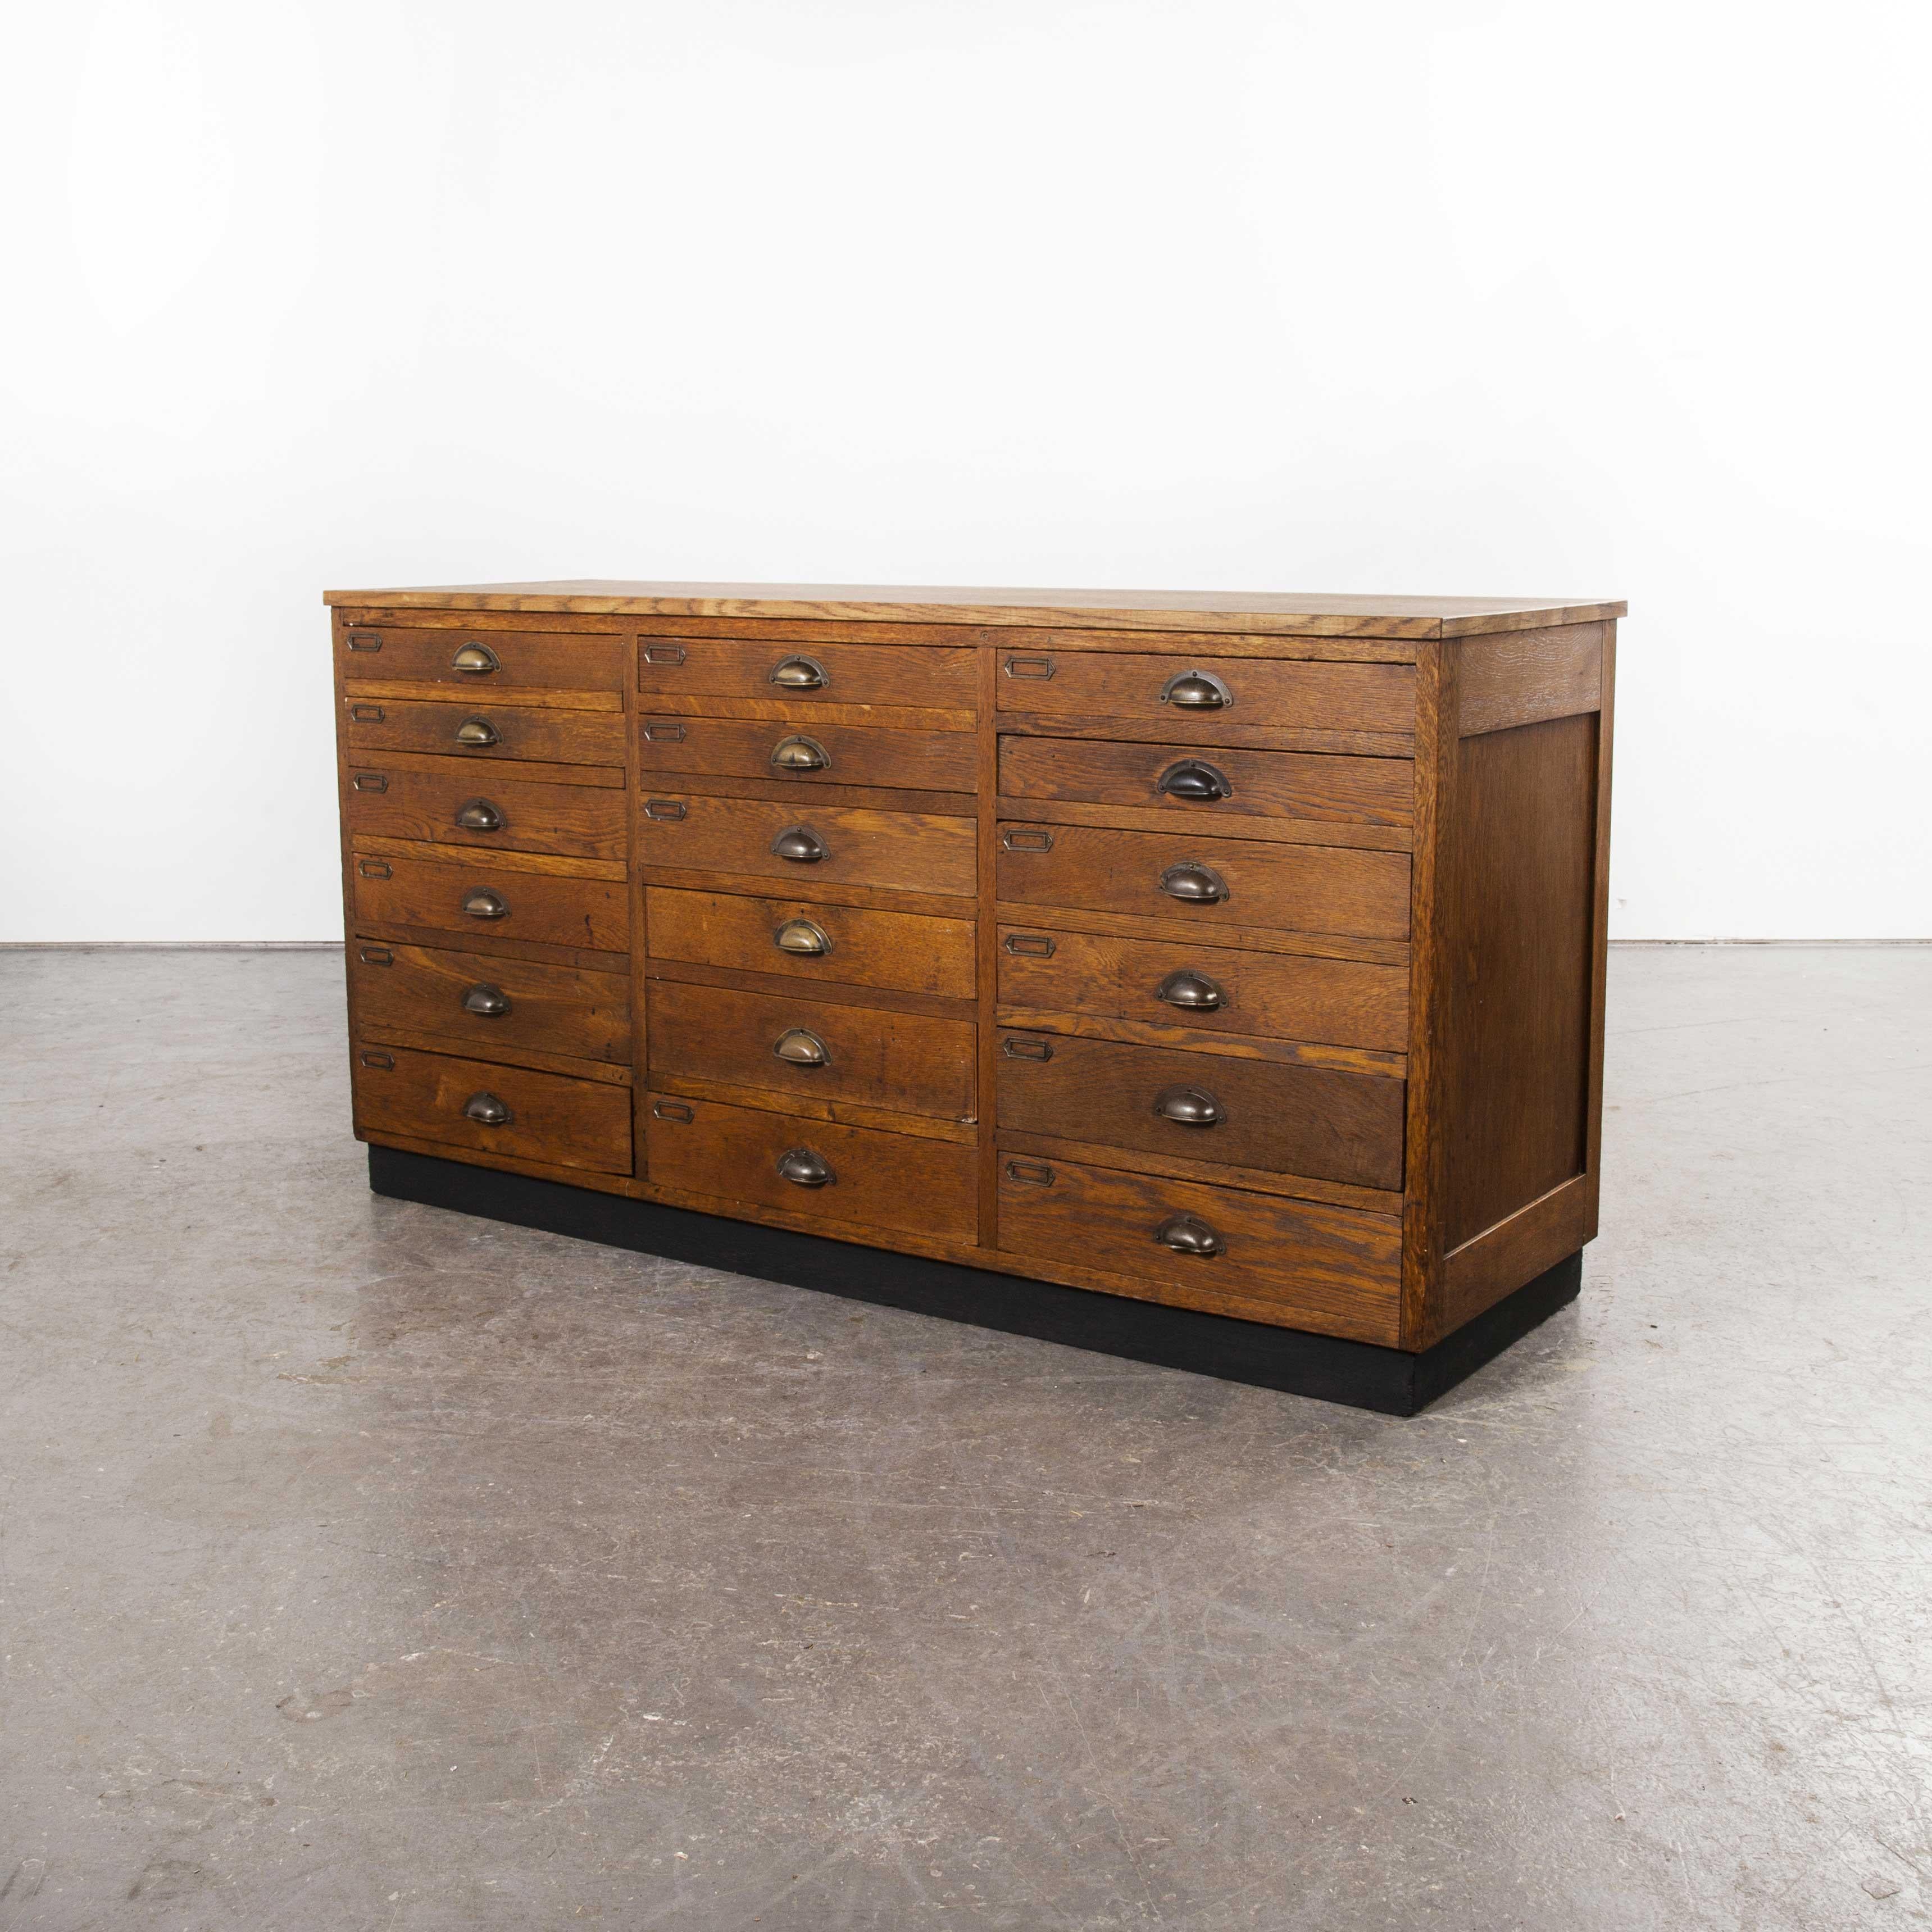 1940s Oak Low Multidrawer Apothercary Chest of Drawers, Eighteen Drawers 7